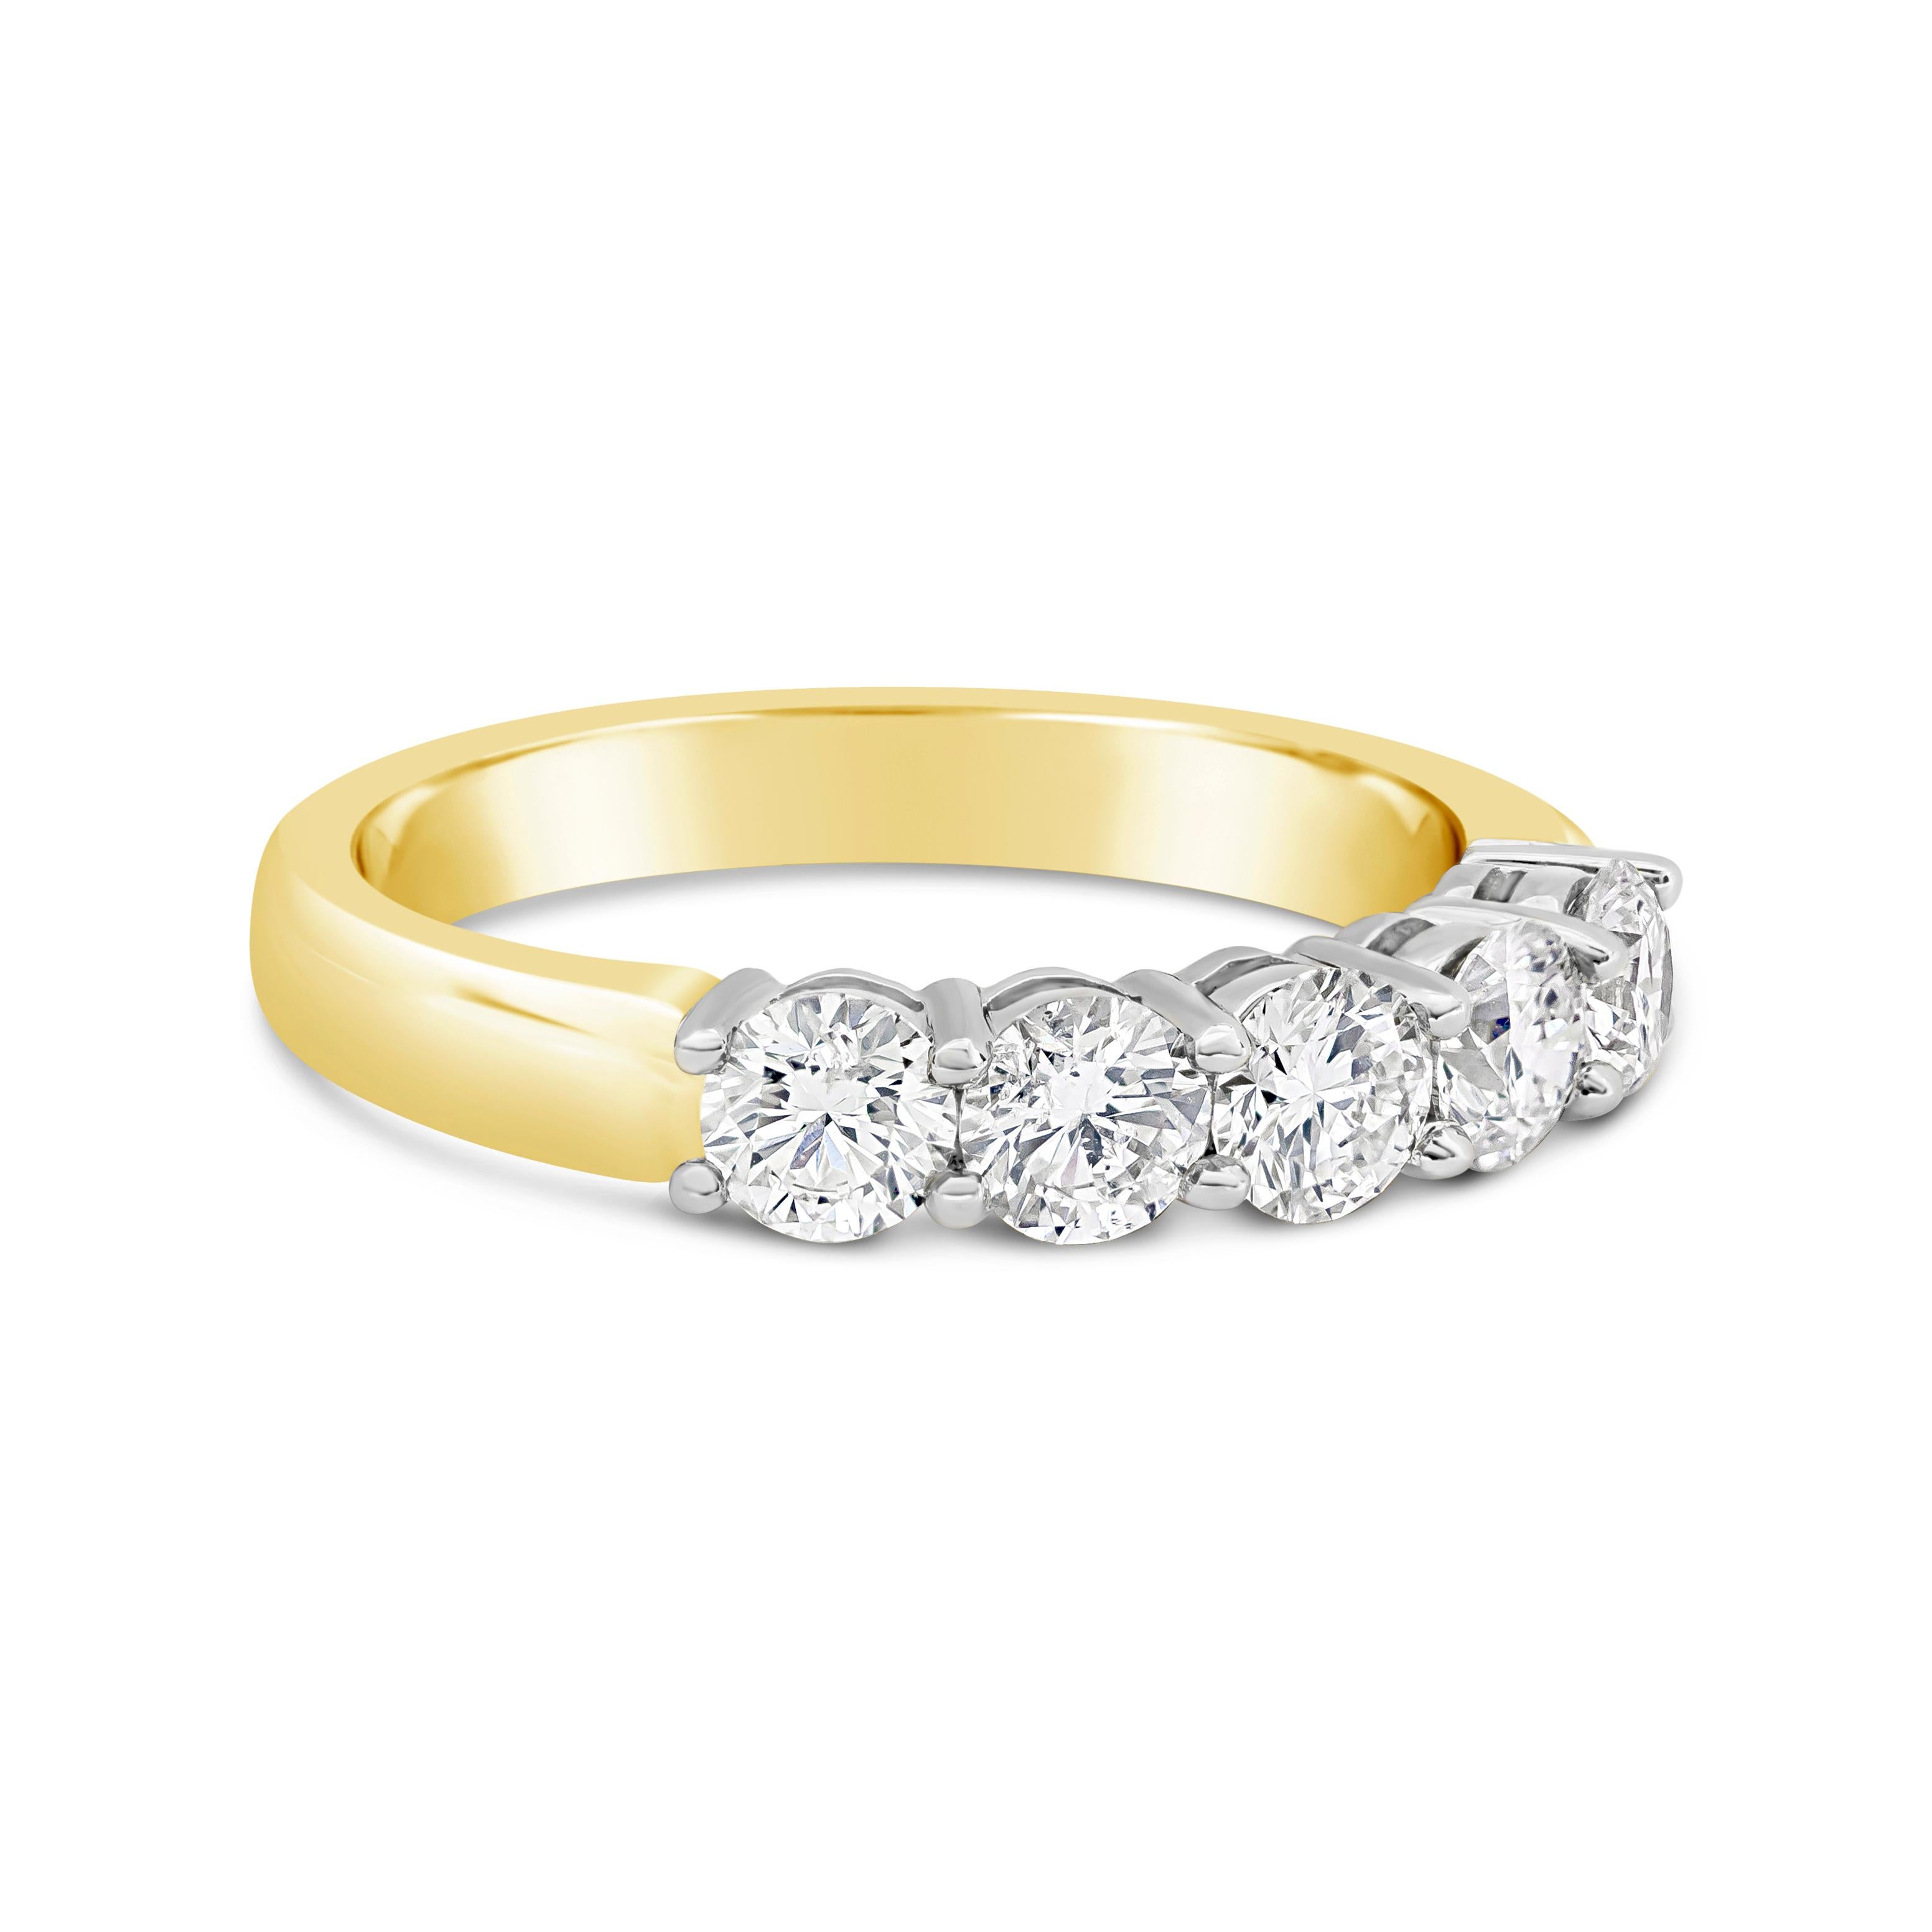 A design that surpasses time because of its simplicity and brilliance. Five sparkling diamonds weighing 2.28 carats total securely sit in shared prongs made in platinum. Polished yellow gold composition with angular edges for a sleek and comfortable